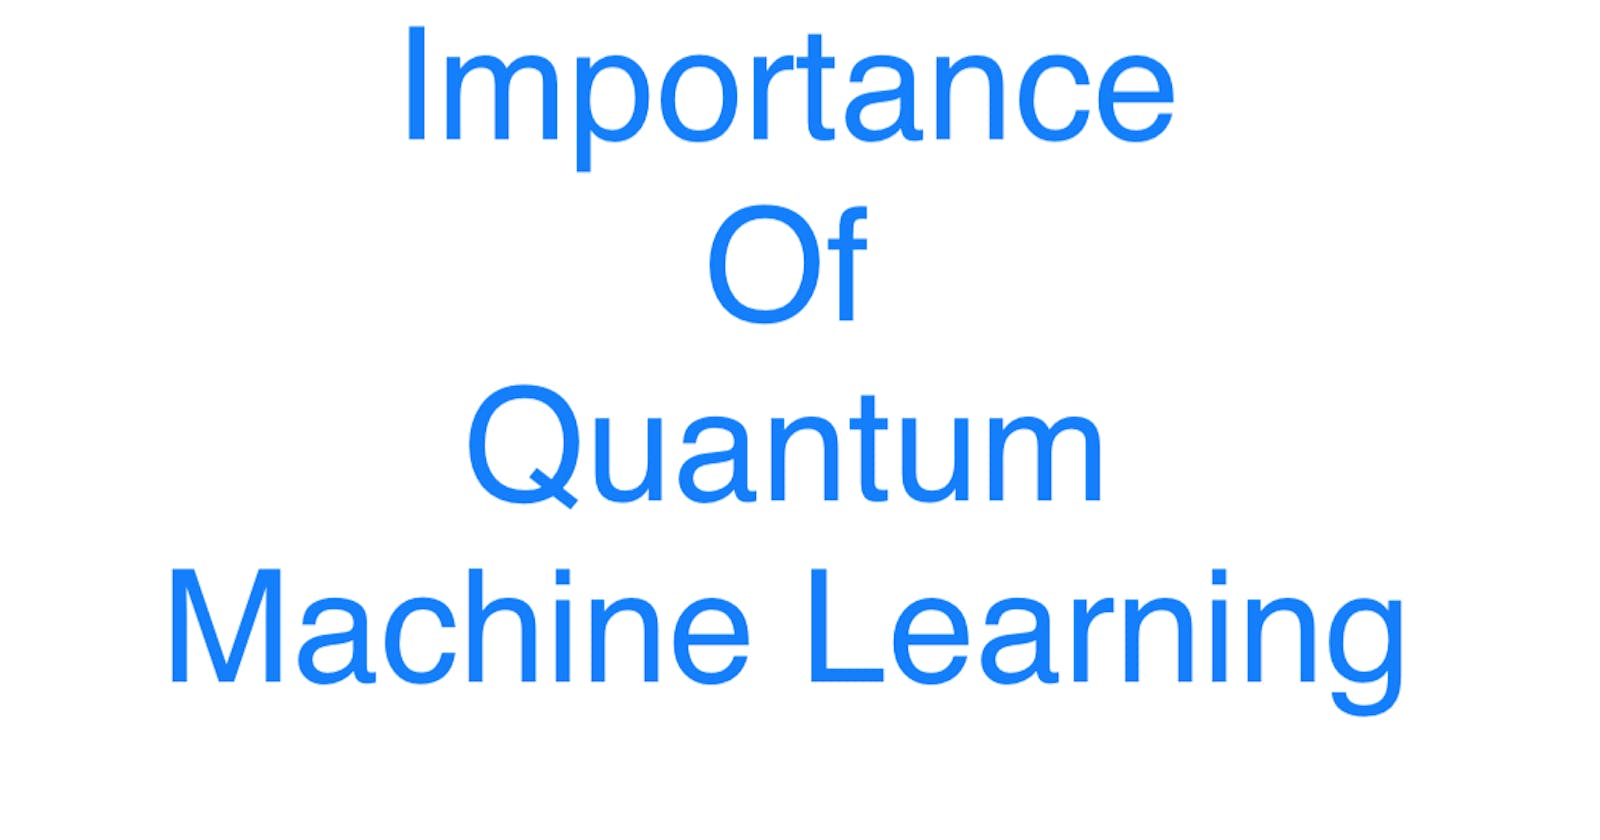 Importance of Quantum Machine Learning